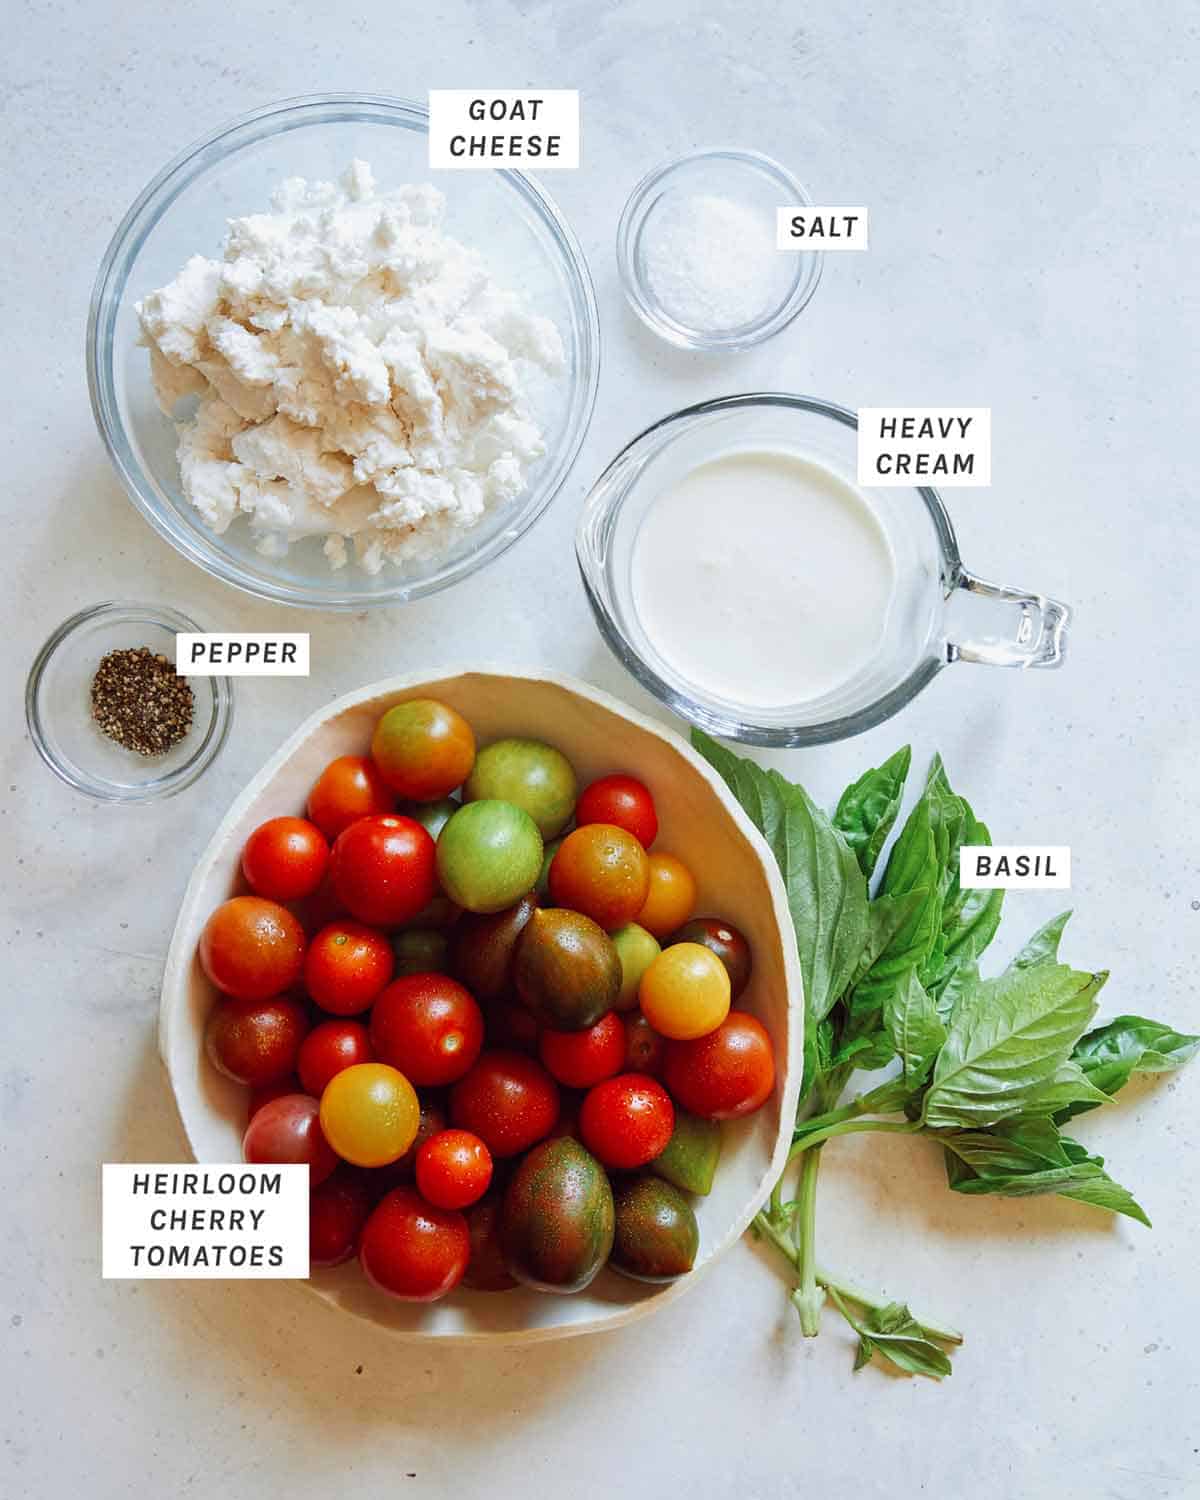 Ingredients for an heirloom tomato tart filling. 